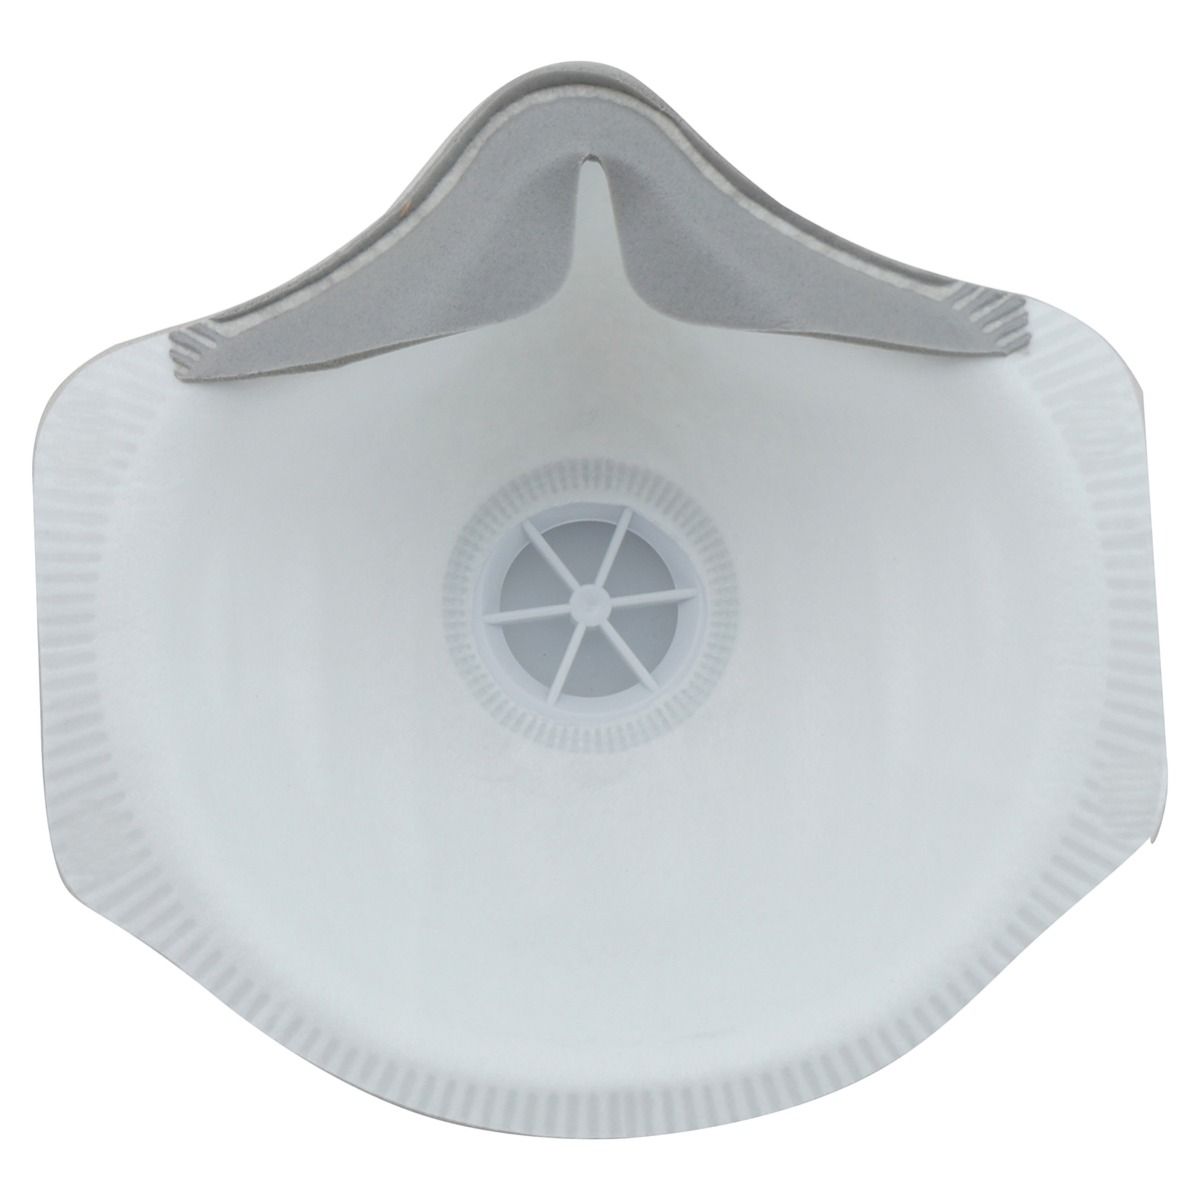 ASW P2 Moulded Mask With Valve (Box of 10)